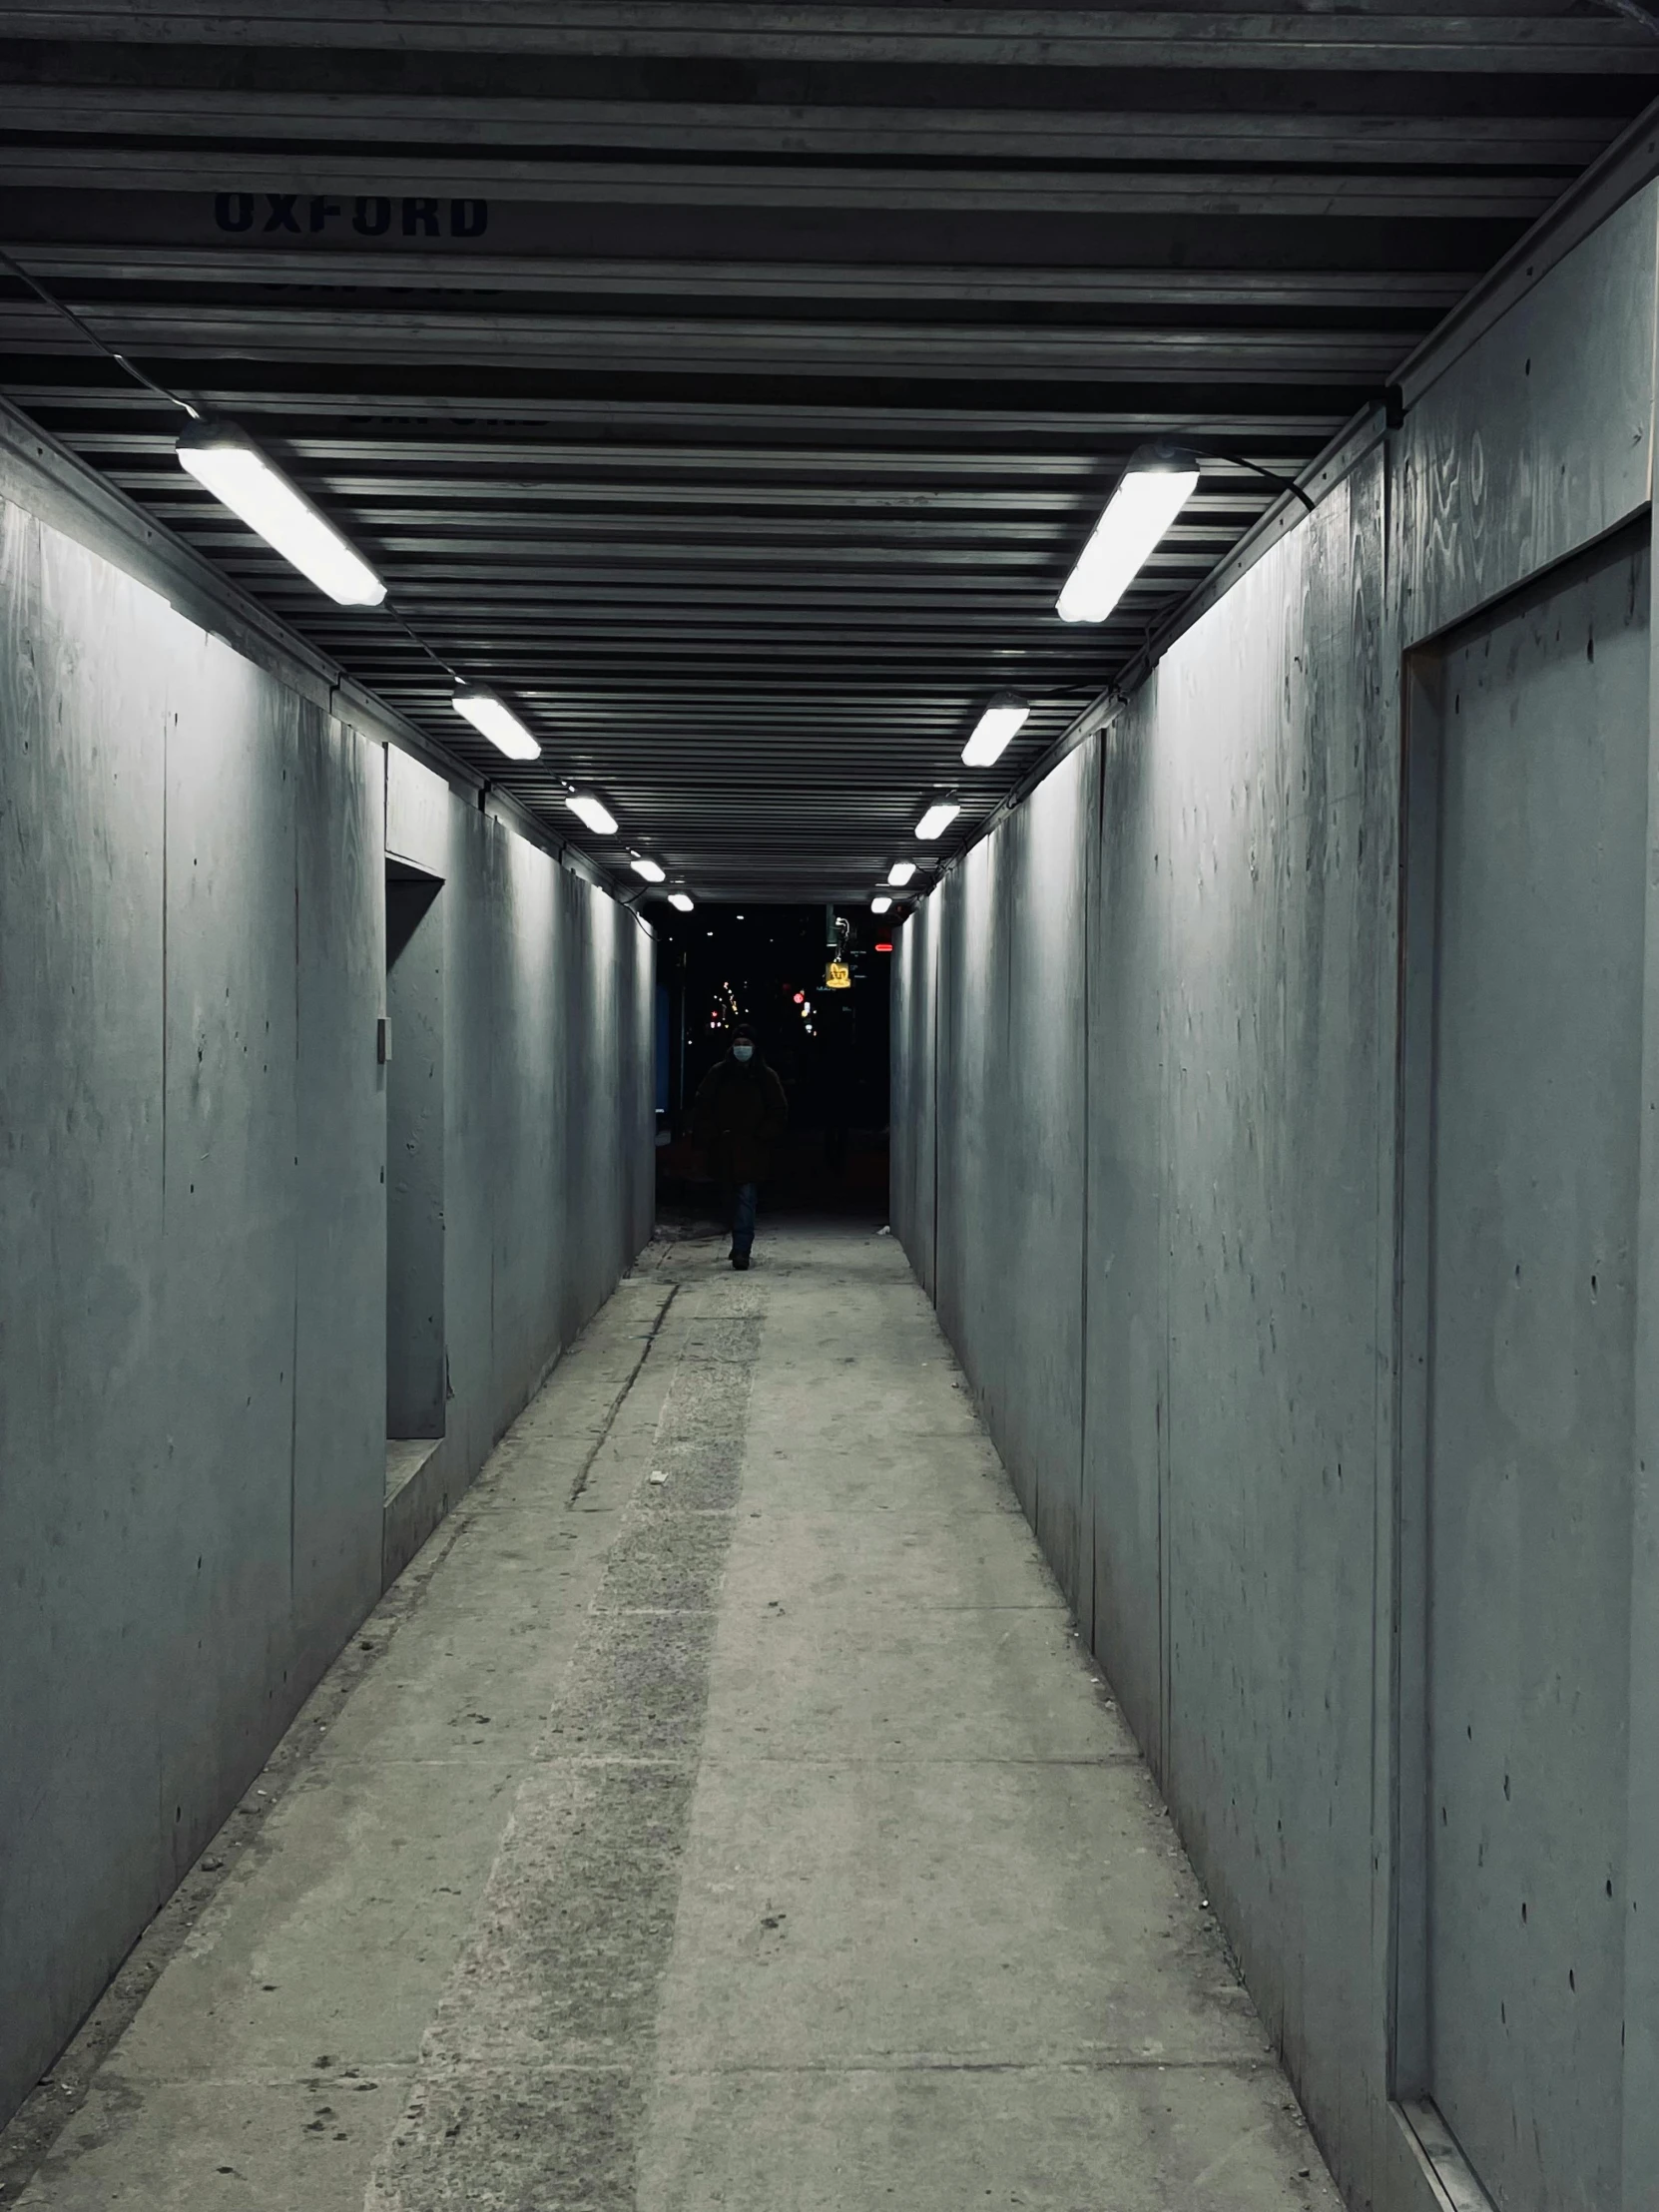 a long hallway with dark light and cement walls